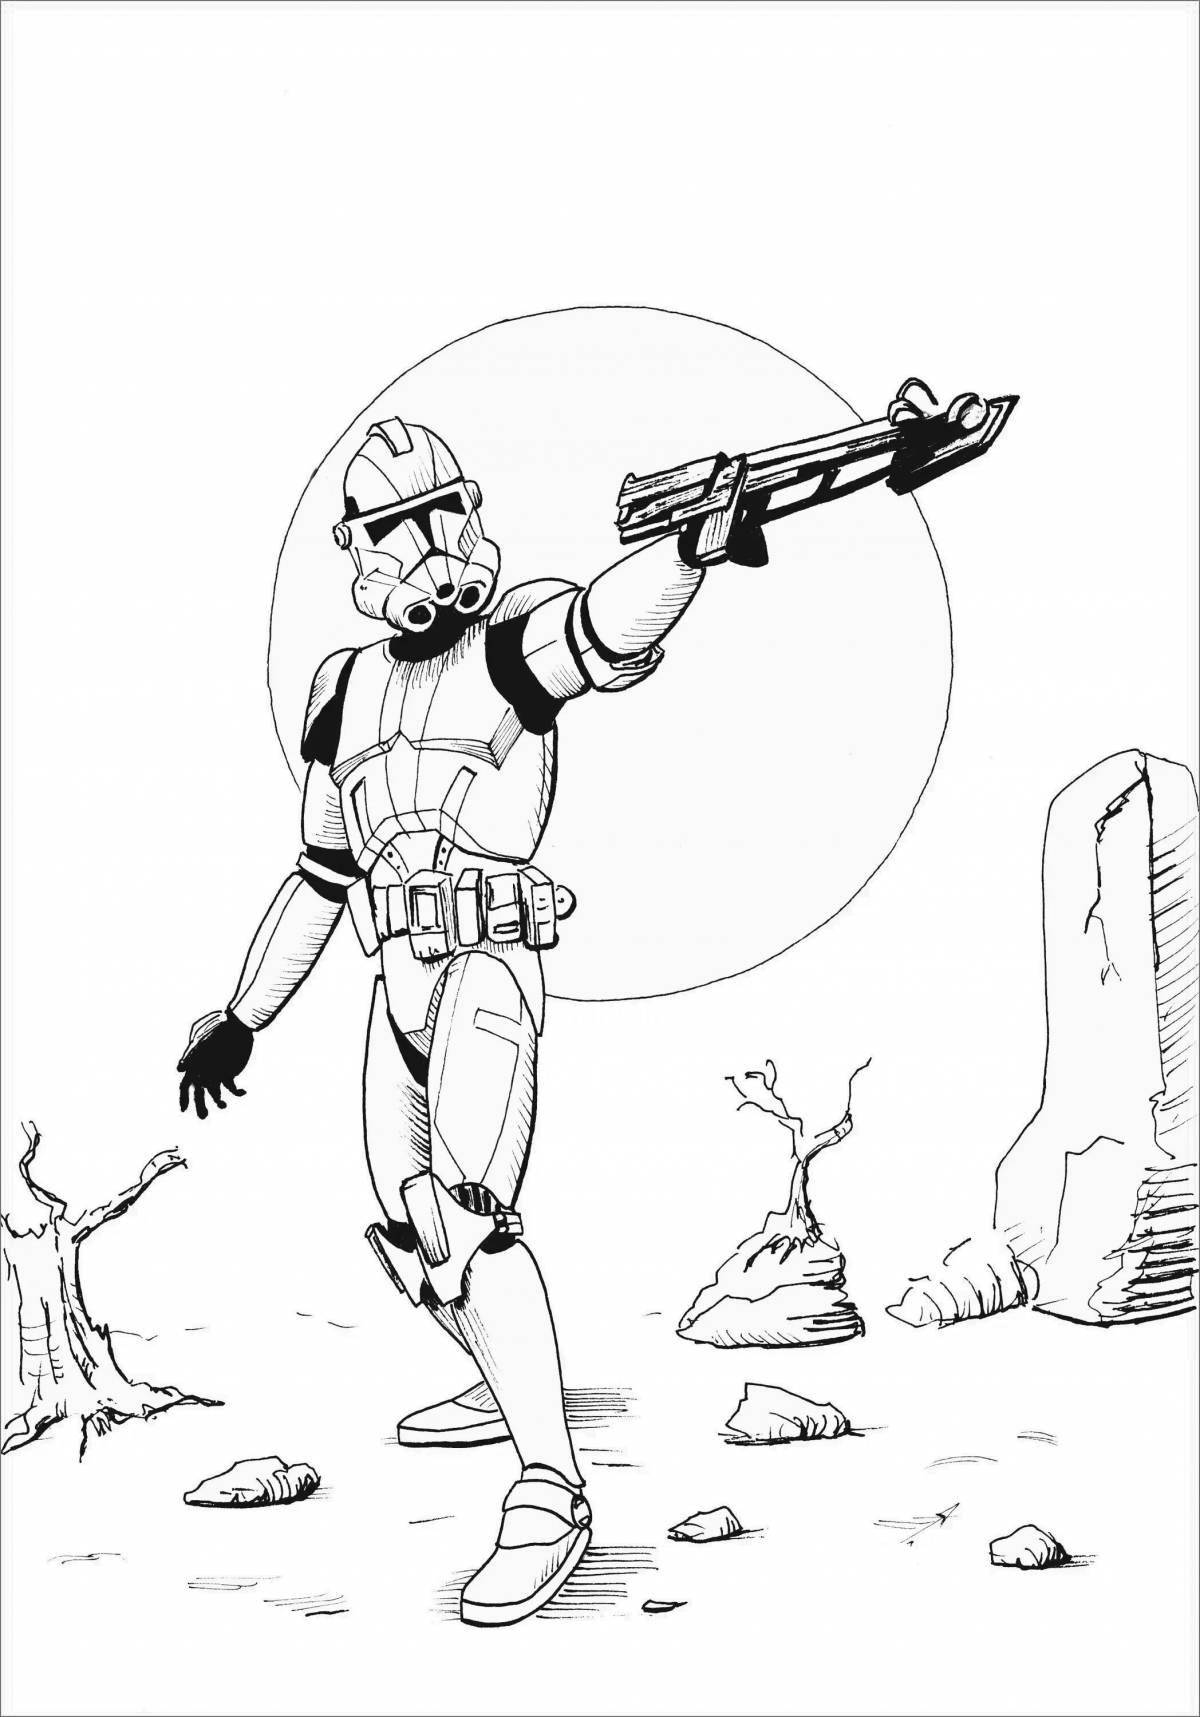 Sublime star wars stormtrooper coloring page